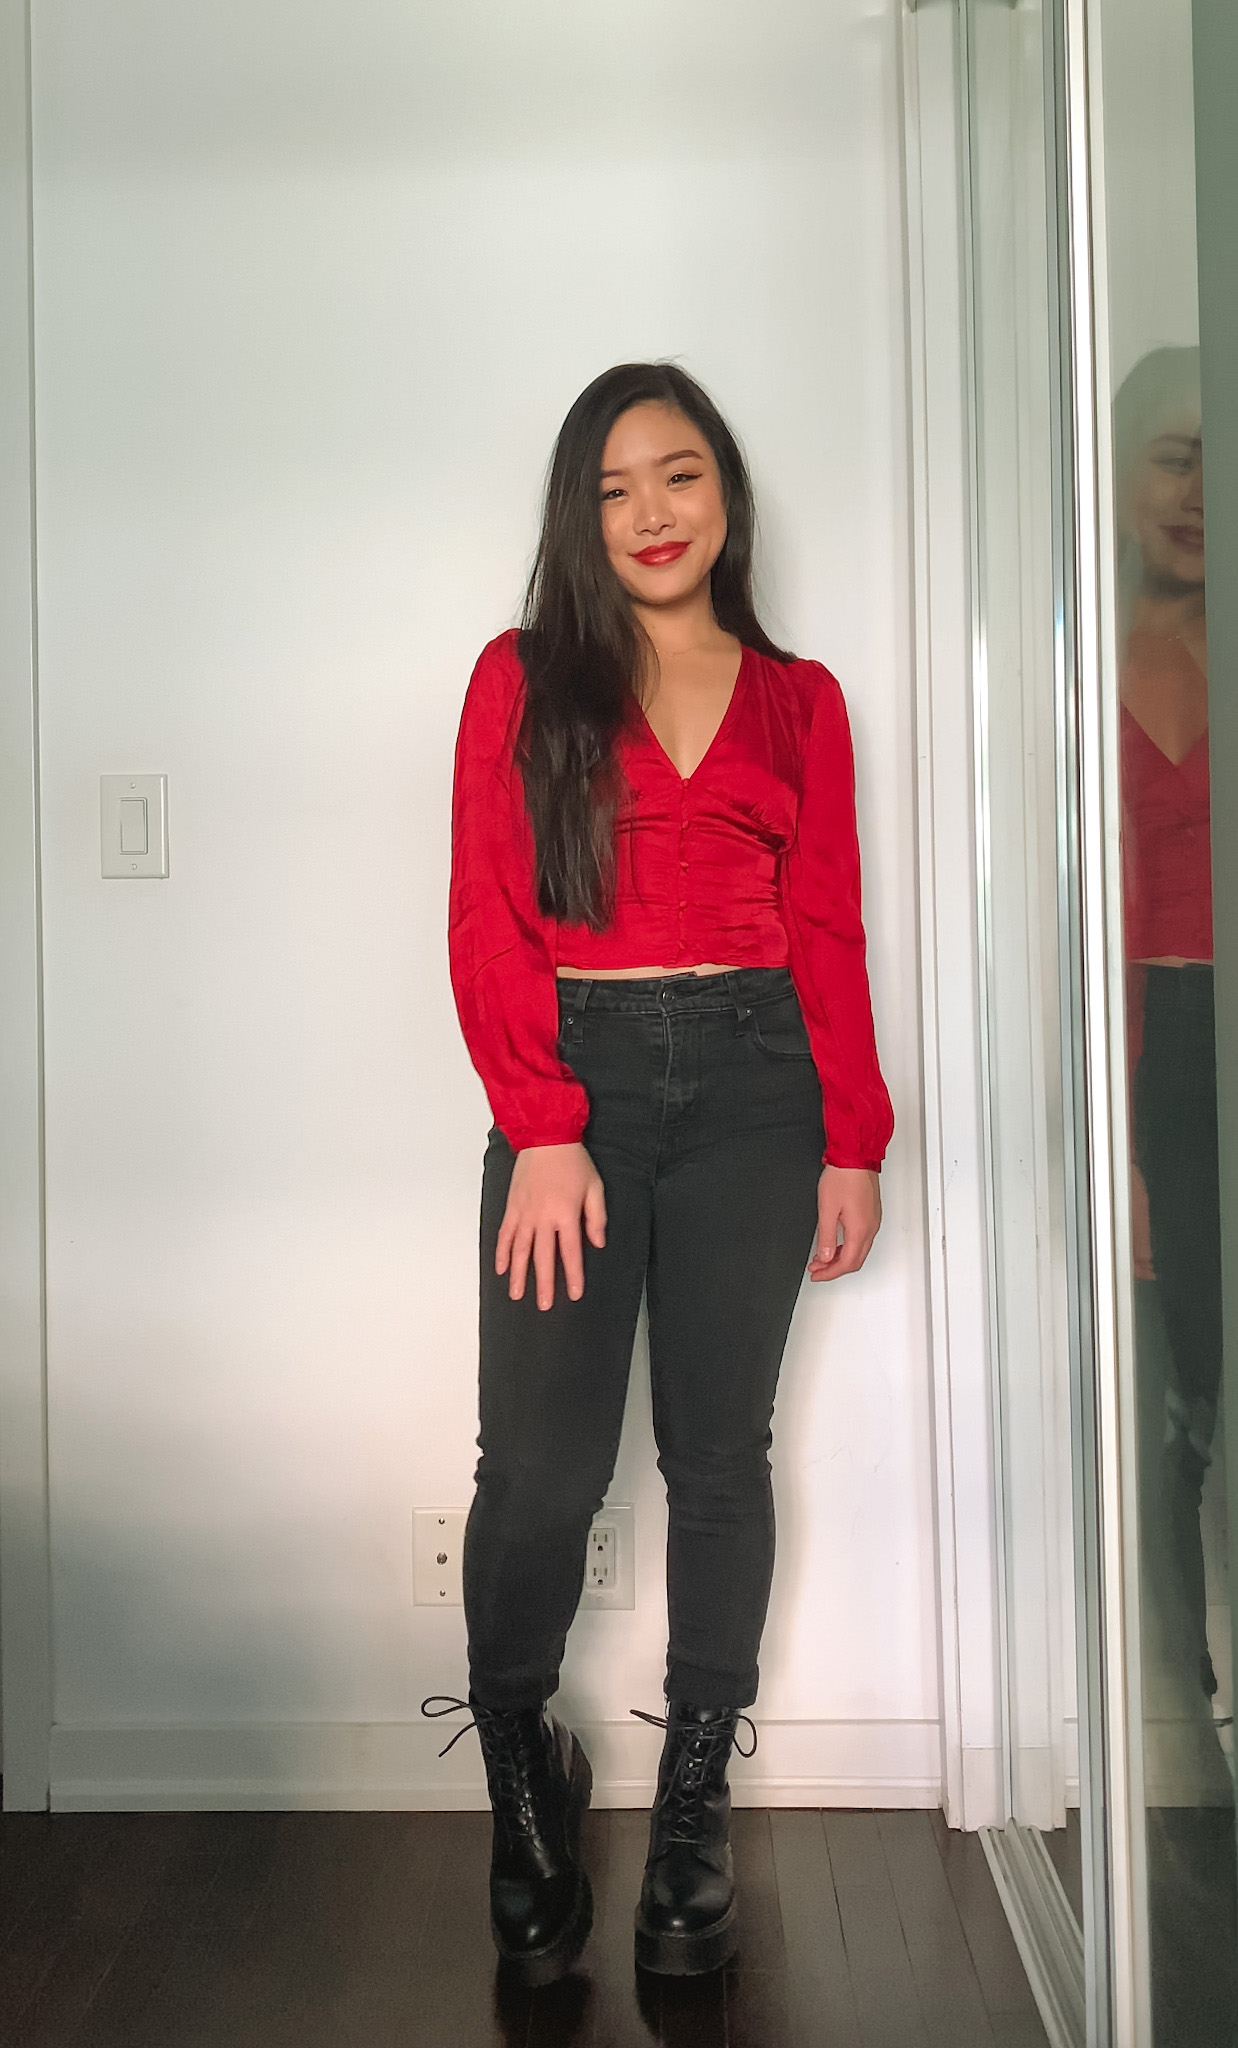 Lunar New Year & Chinese New Year outfit ideas | Aritzia red blouse + Levi's black denim + Steve Madden combat boots